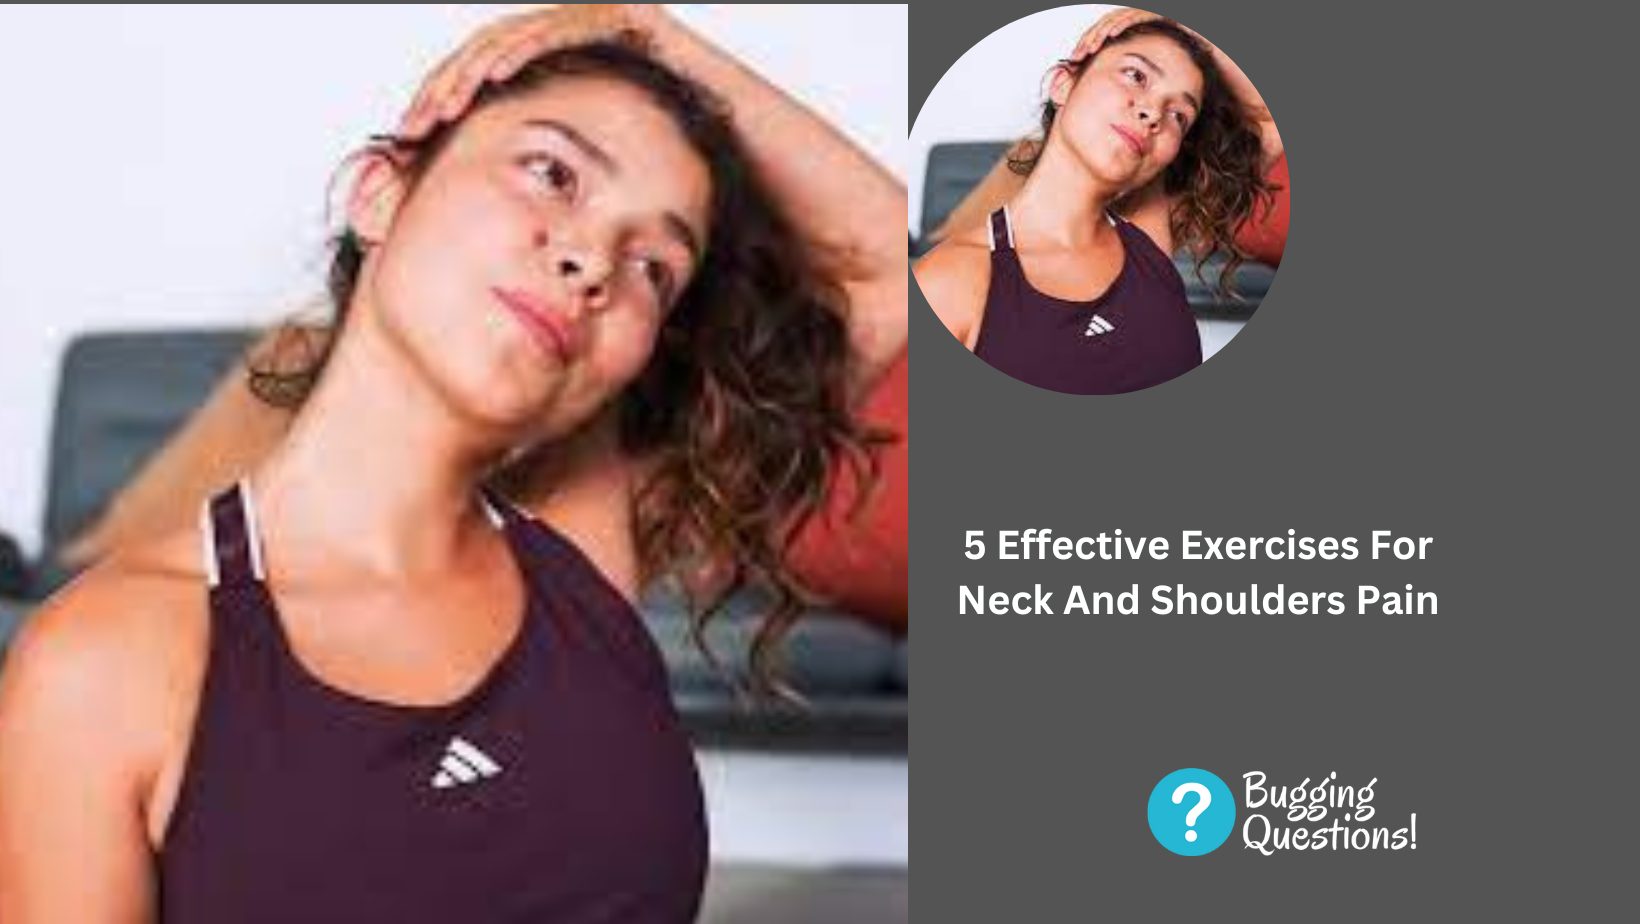 5 Effective Exercises For Neck And Shoulders Pain